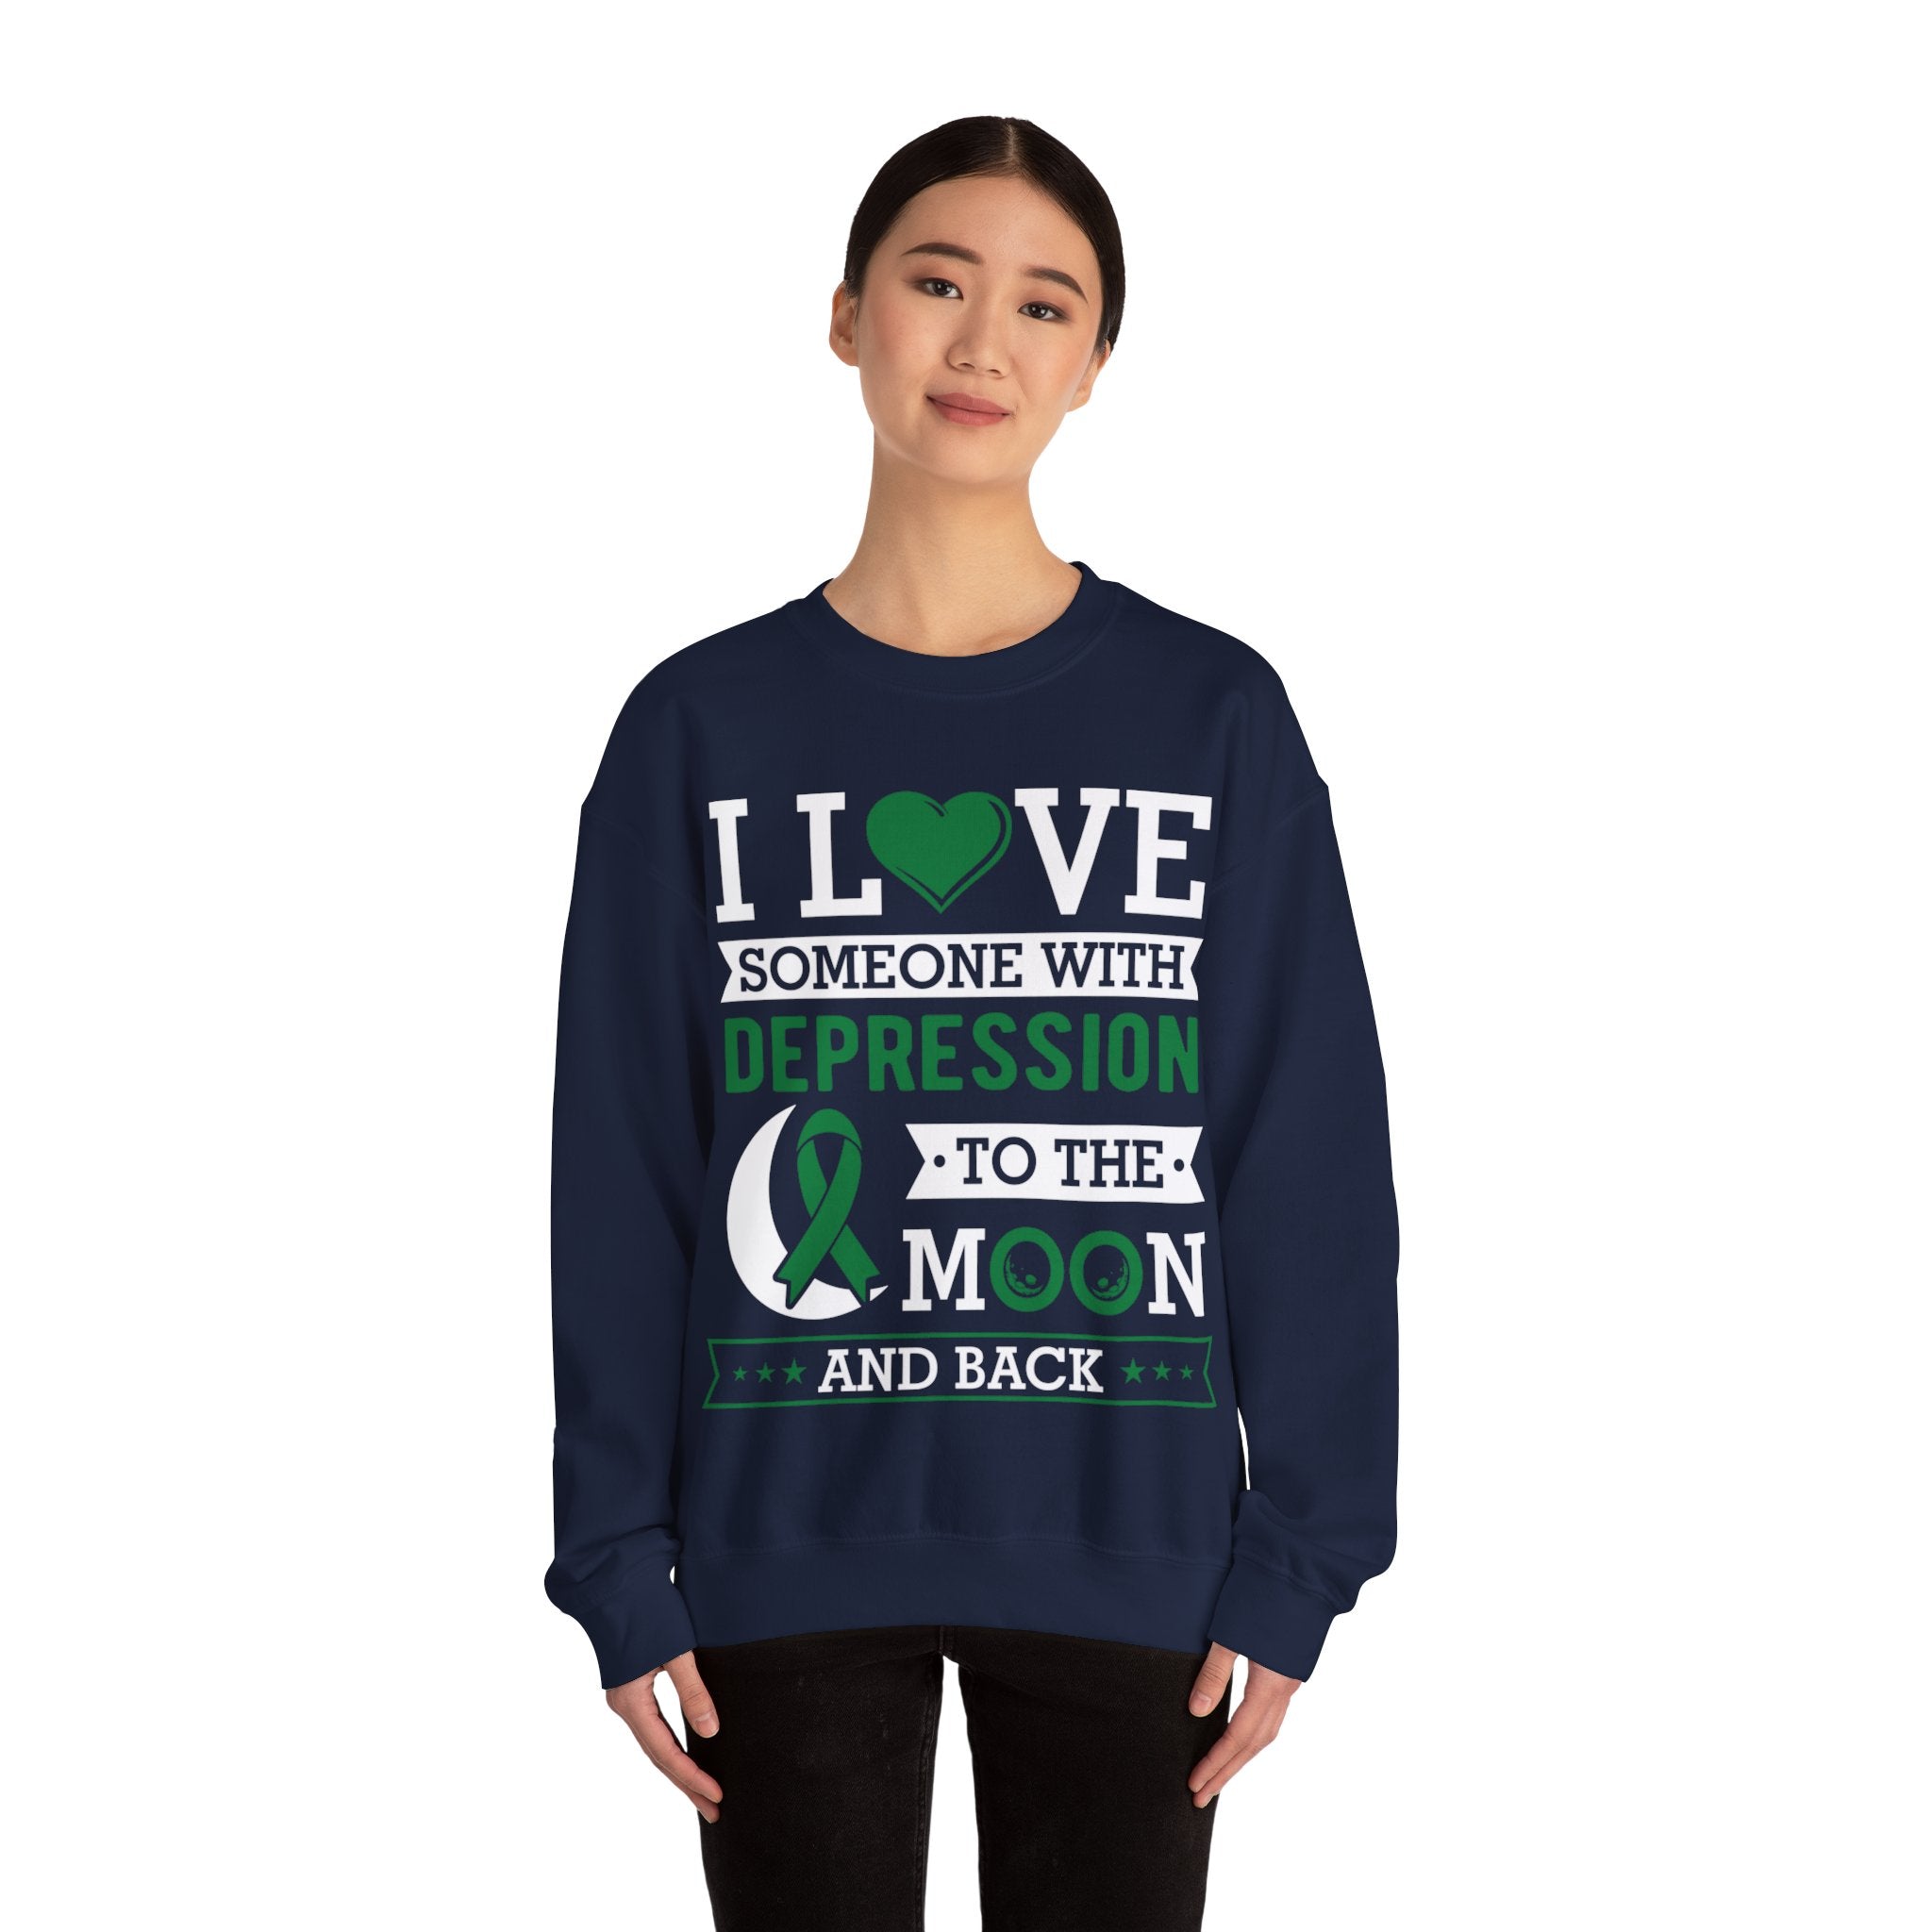 "I Love Someone with Depression" Support Unisex Heavy Blend™ Crewneck Sweatshirt - A Message of Compassion & Understanding